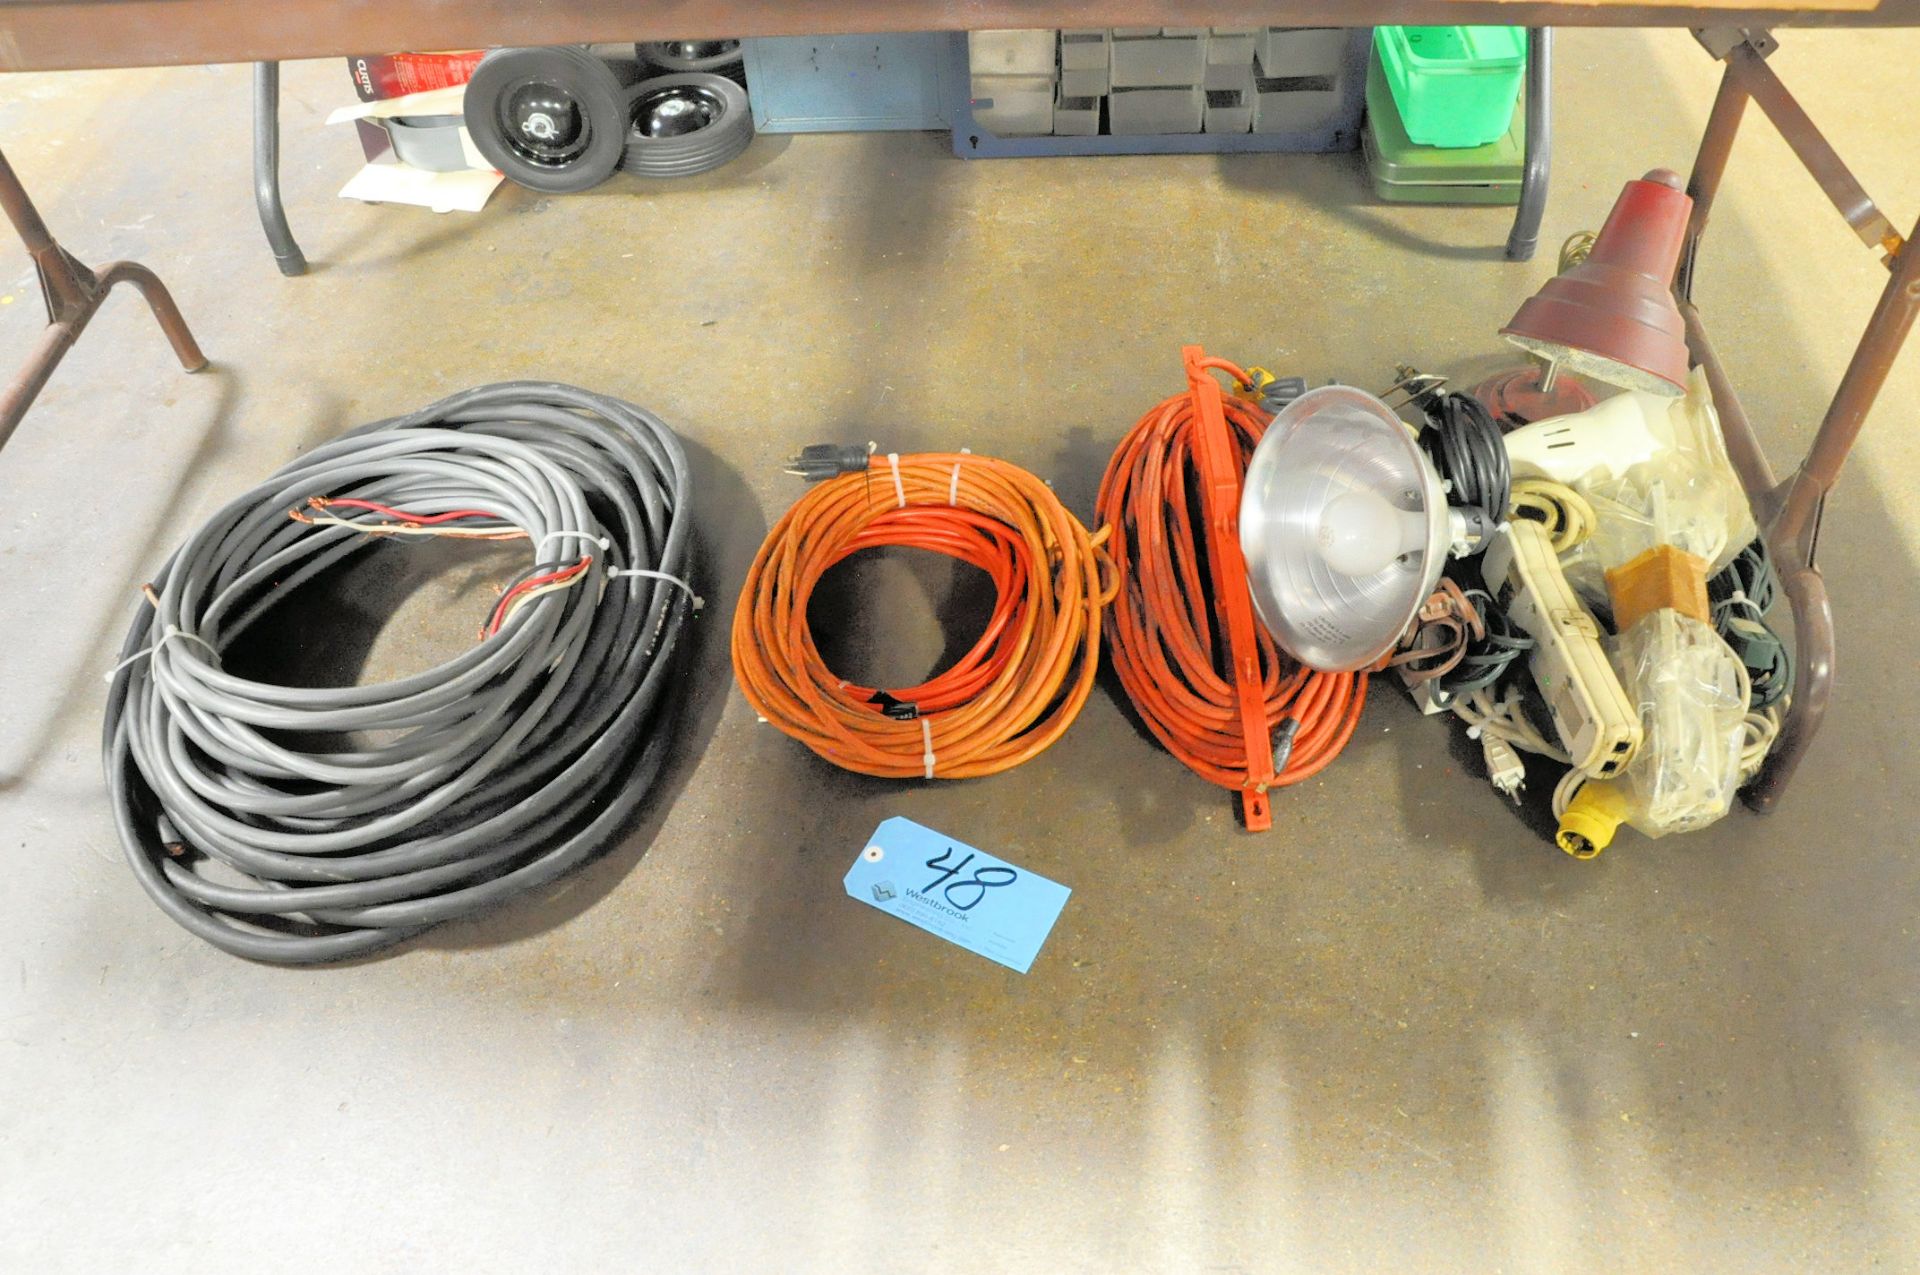 Lot-Extension Cords, Lights and Wire on Floor Under (1) Table